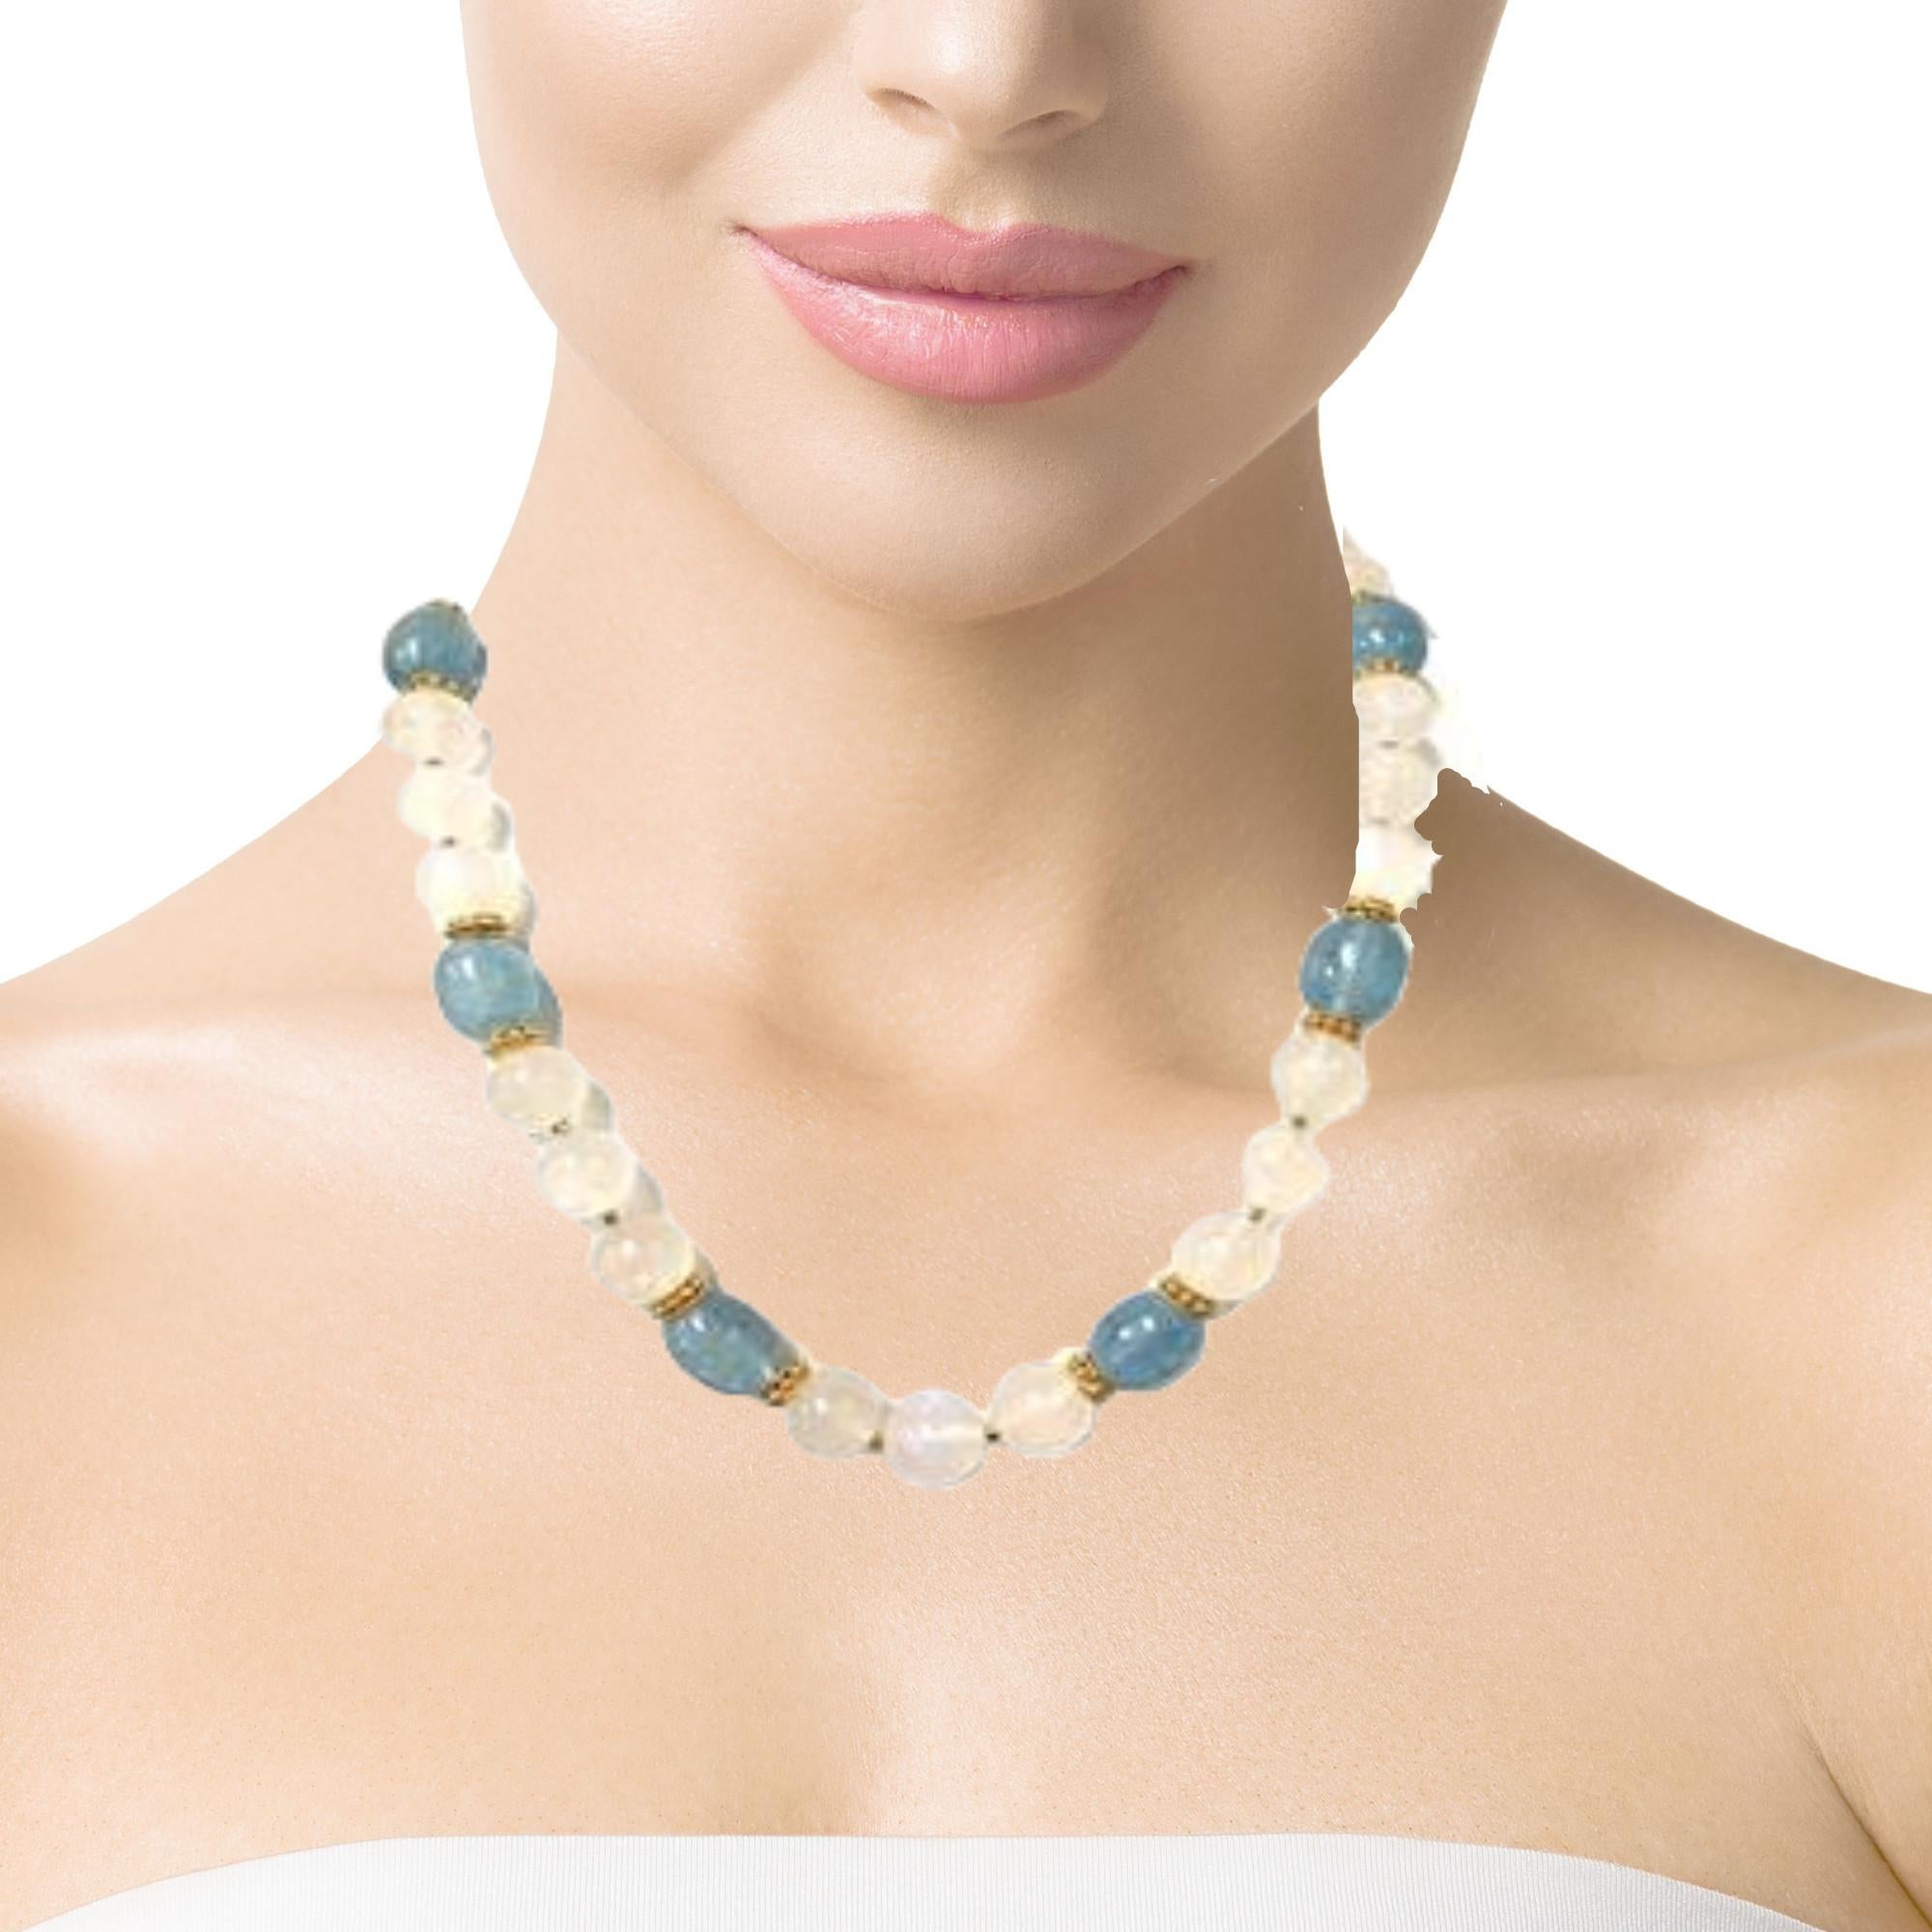 Moonstone Bead and Aquamarine Bead Necklace with Yellow Gold Spacers, 24 Inches 4